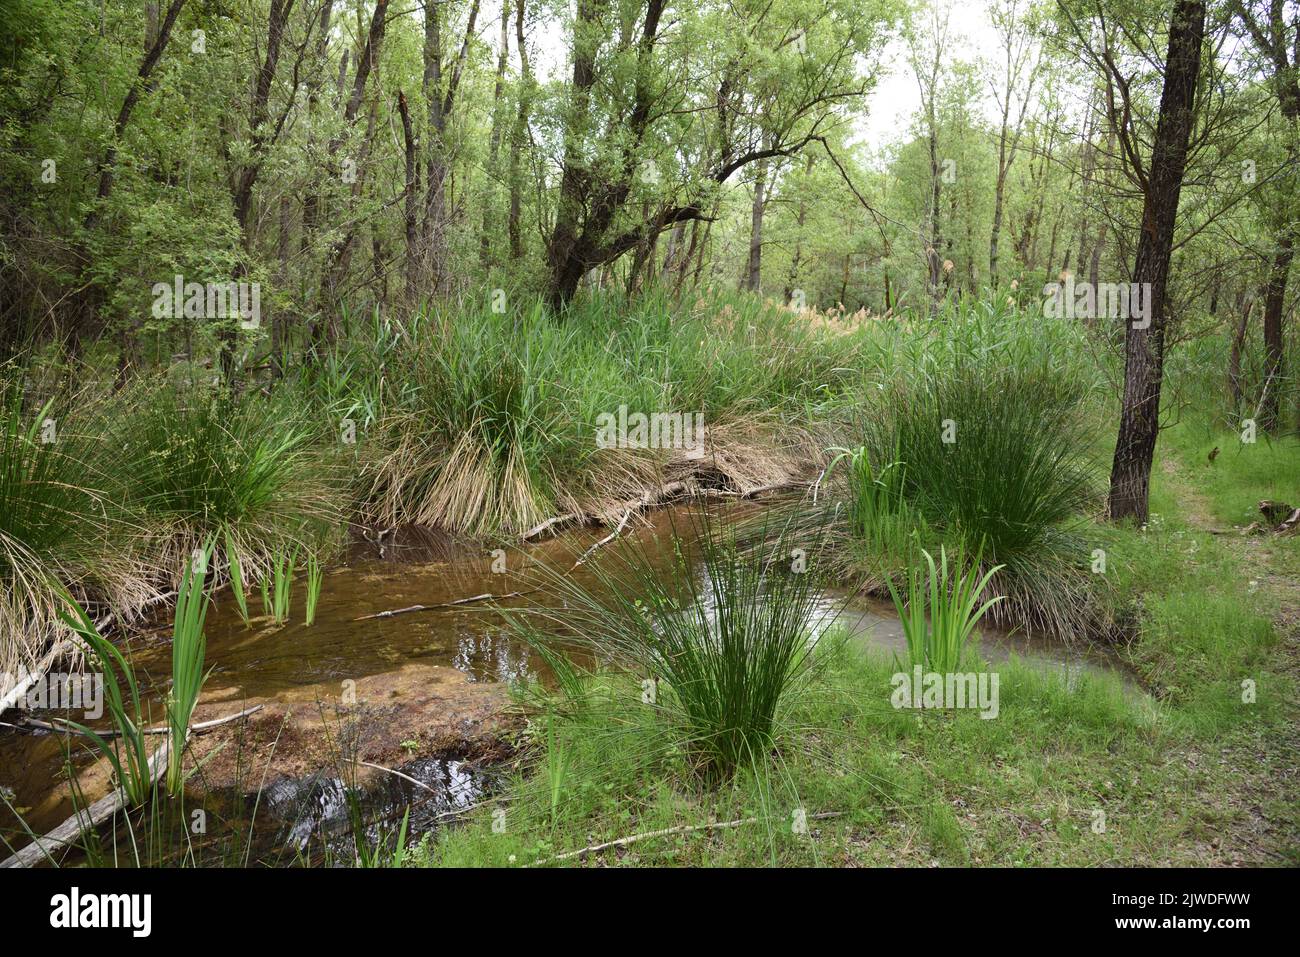 La Cause River & Reeds or Reed Beds in the Sainte Victoire Mountain Nature Reserve near Le Tholonet Aix-en-Provence Provence France Stock Photo